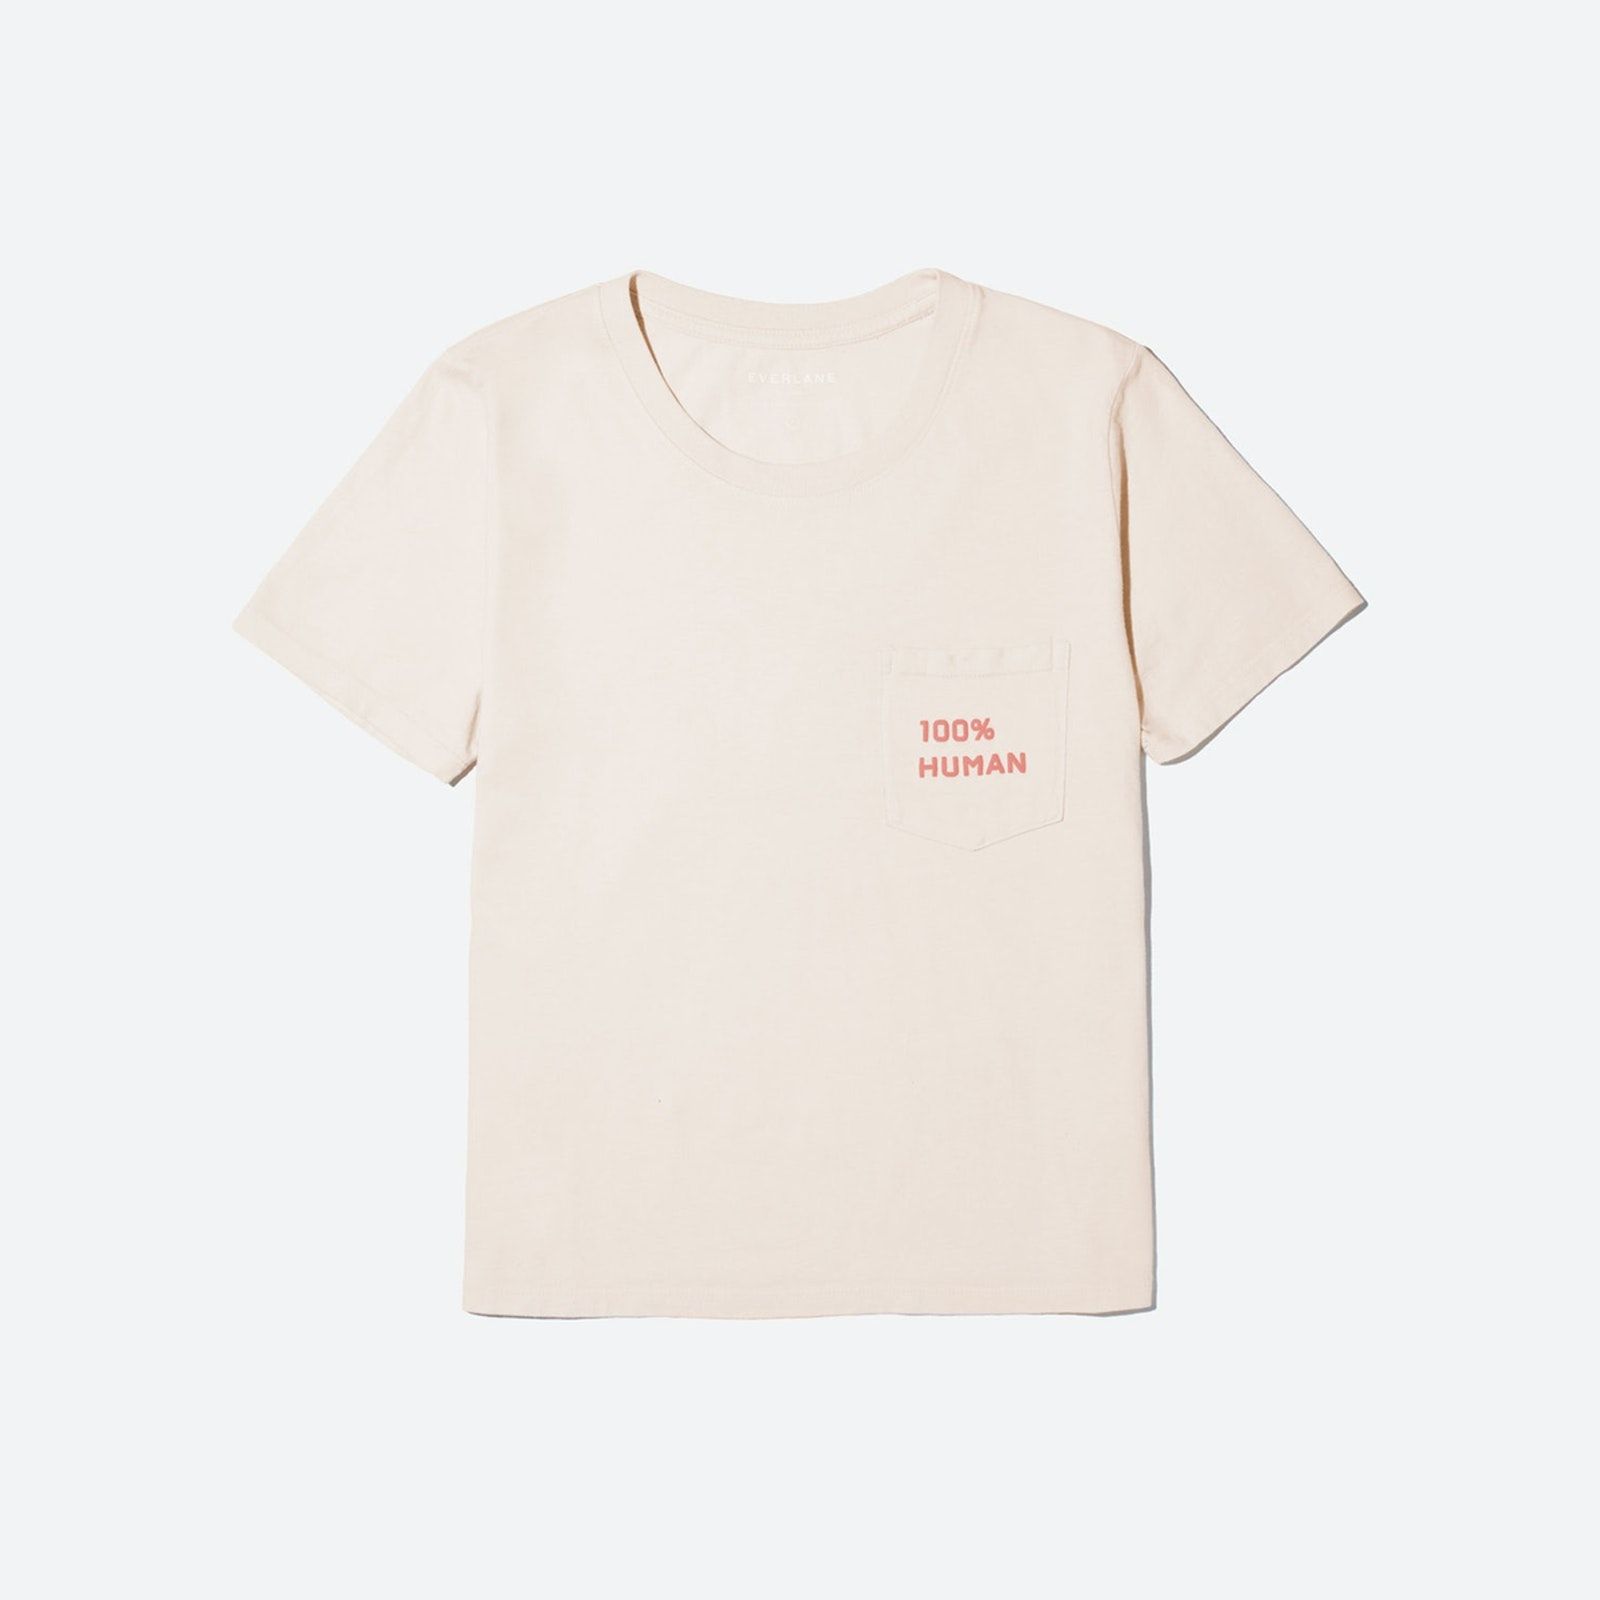 Women's 100% Human Cotton Box-Cut T-Shirt in Small Print by Everlane in Muted Pink / Pink, Size XXS | Everlane